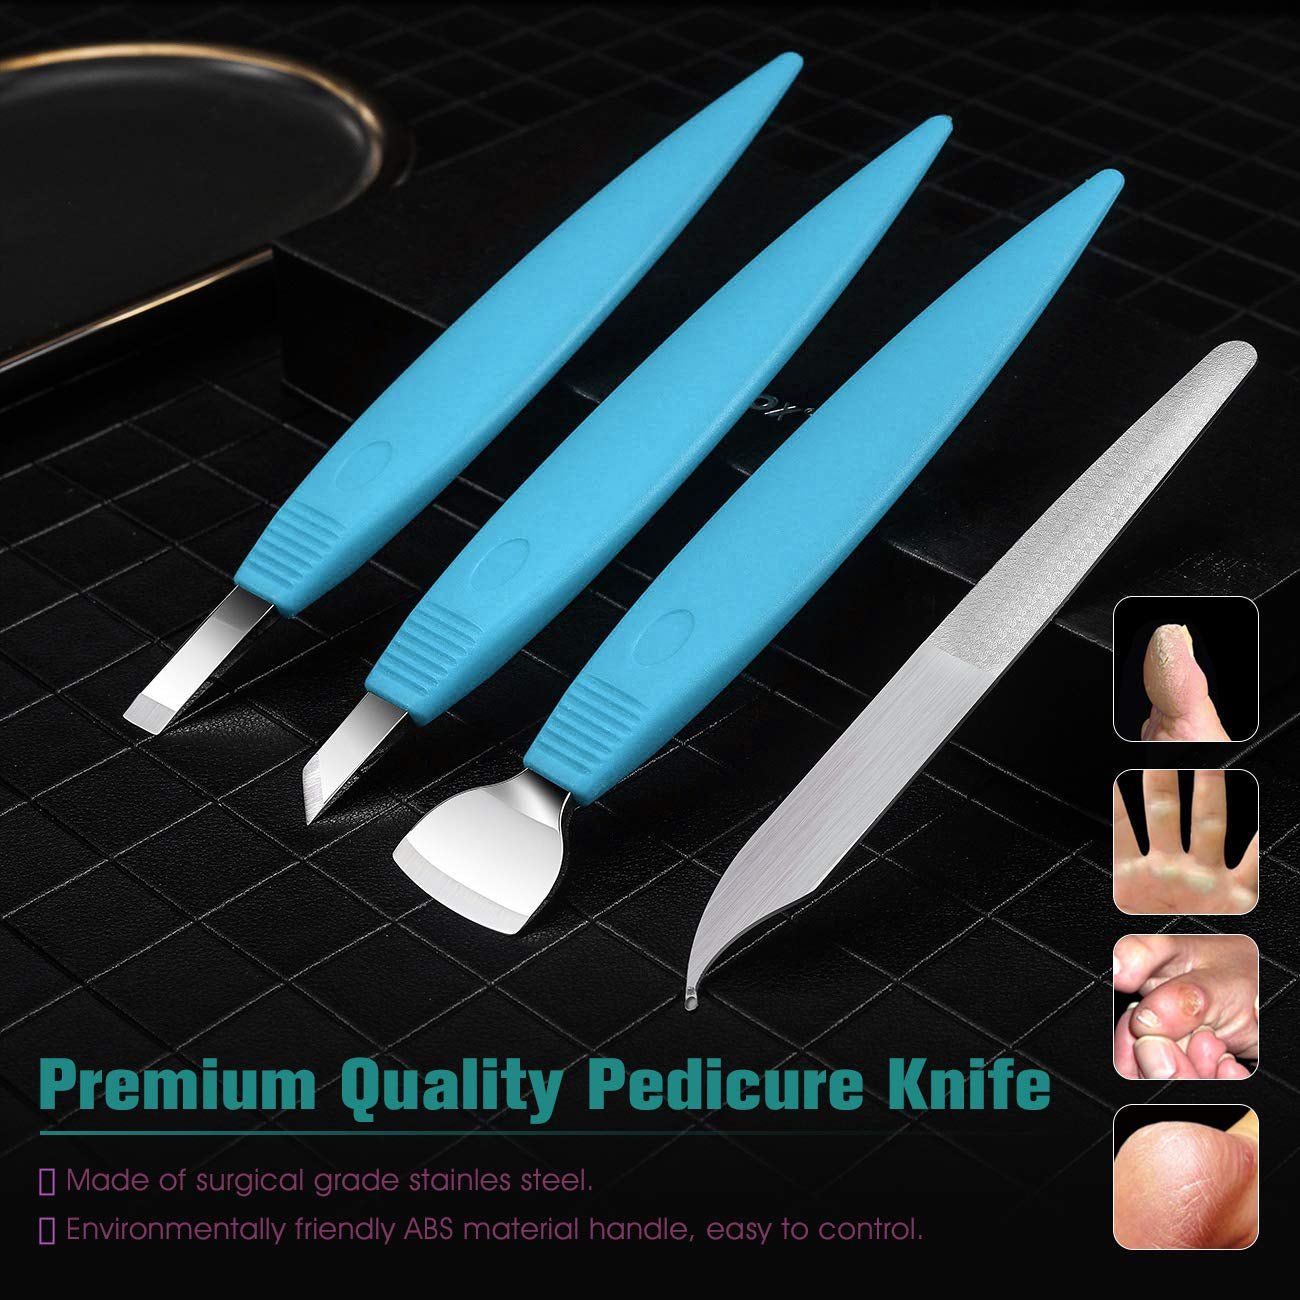 Pedicure Knife Set - Callus Shavers, Corn and Hard Thick Skin Remover Knives for Foot, Metal Nail File & Nail Lifter - Professional Pedicure Tools with Storage Box (Blue)